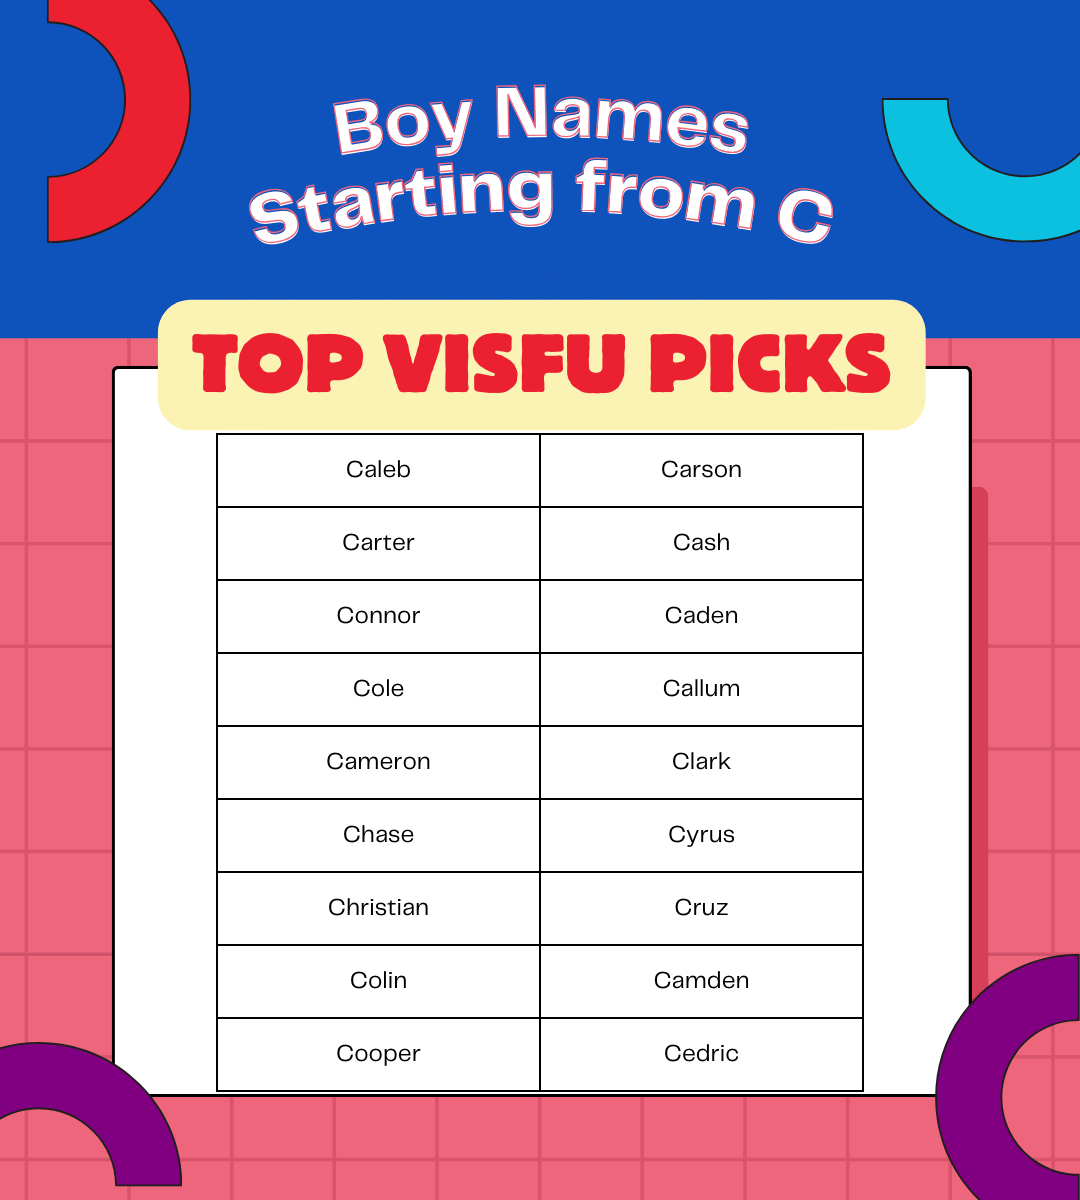 Boy names starting from C